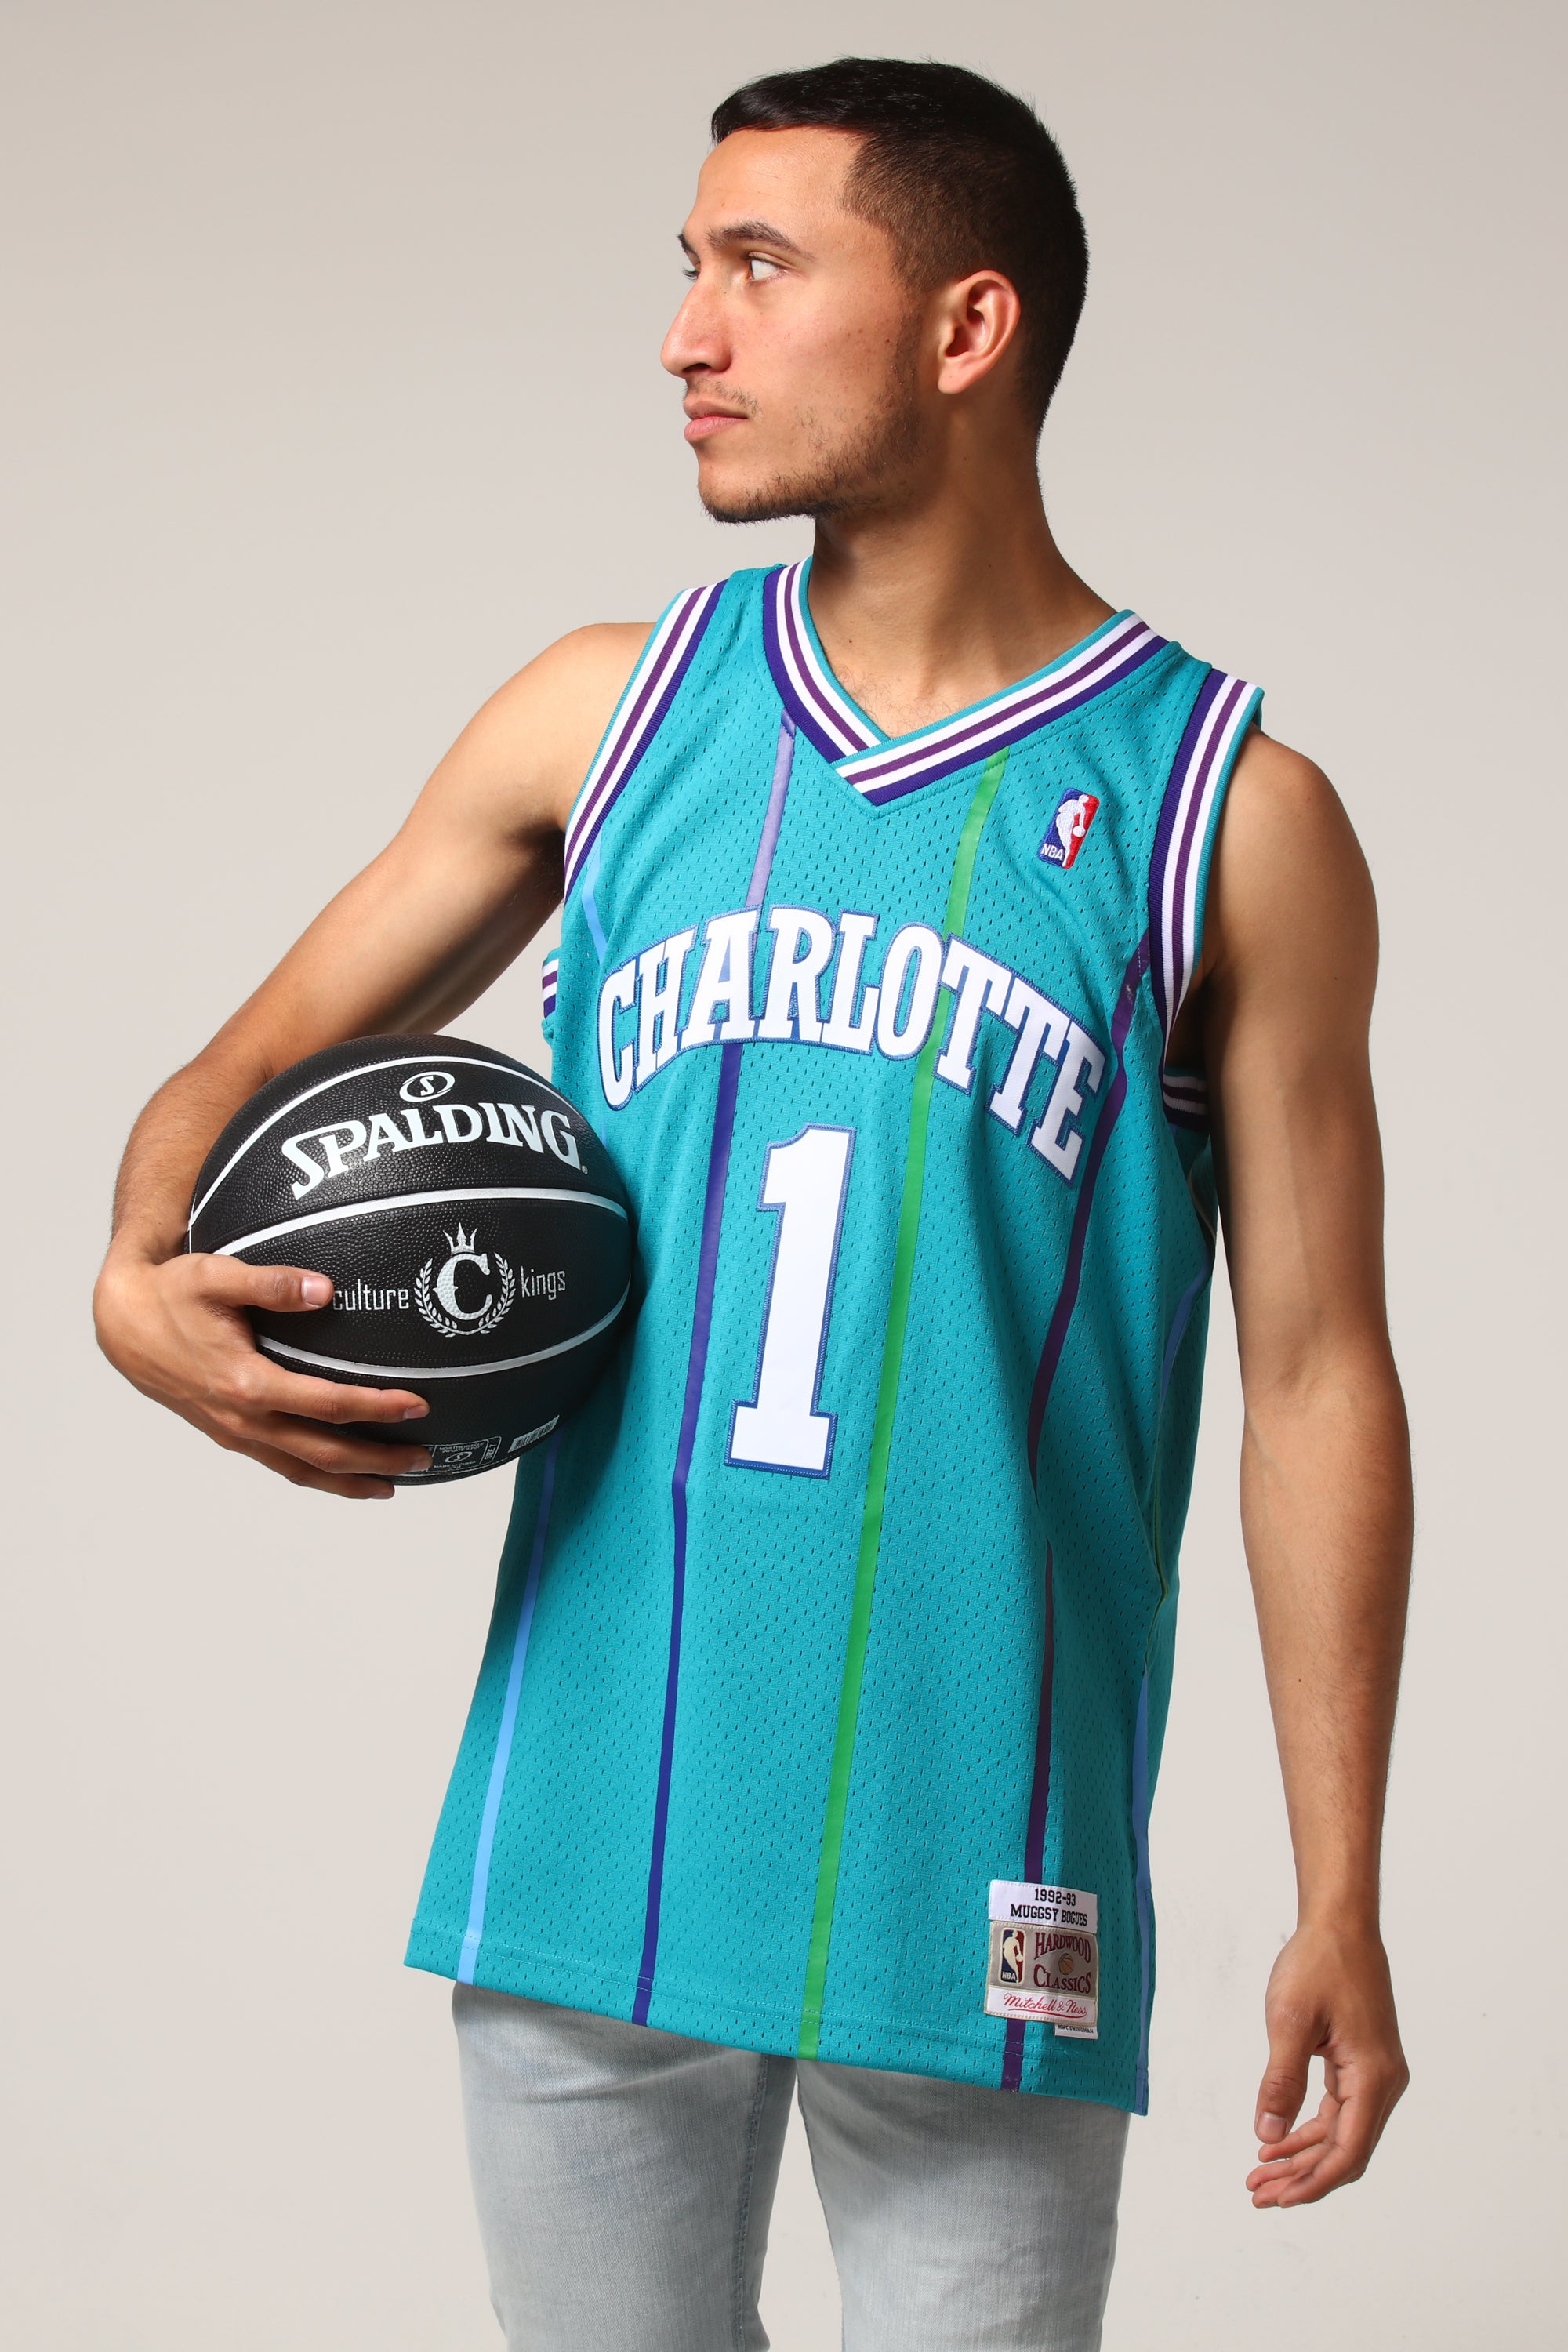 charlotte hornets jersey muggsy bogues